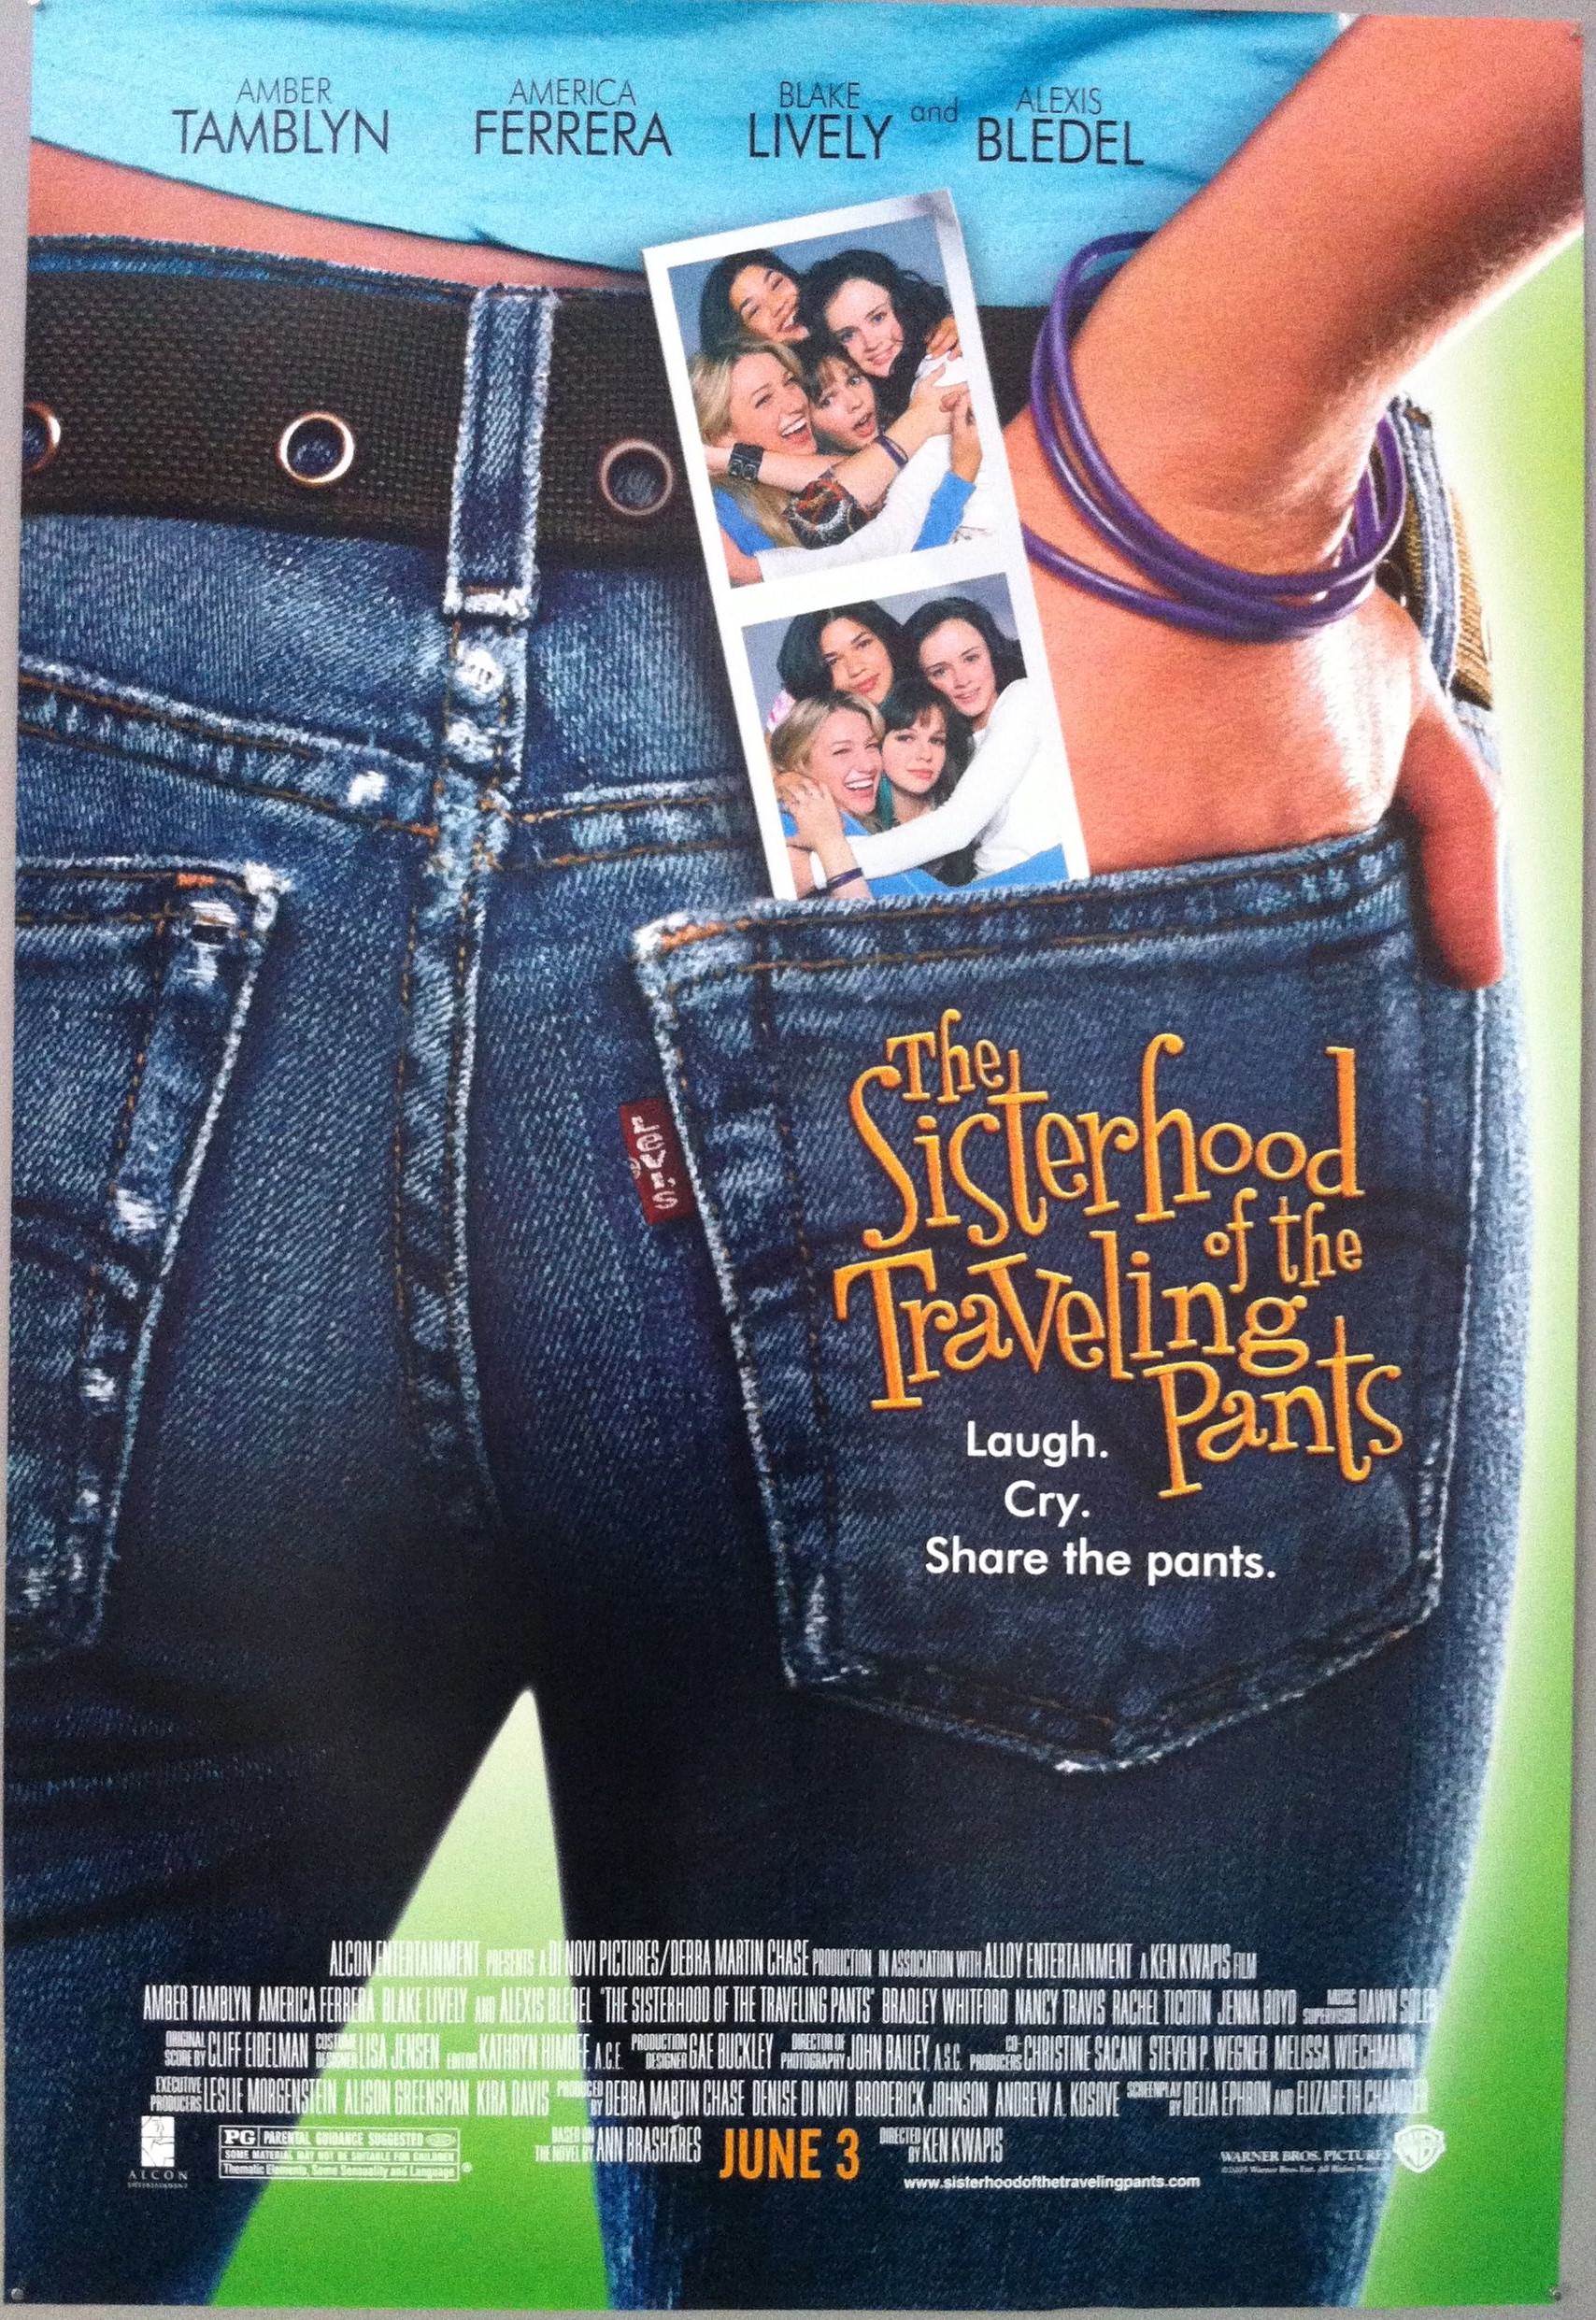 The Sisterhood of the Traveling Pants – Poster Museum